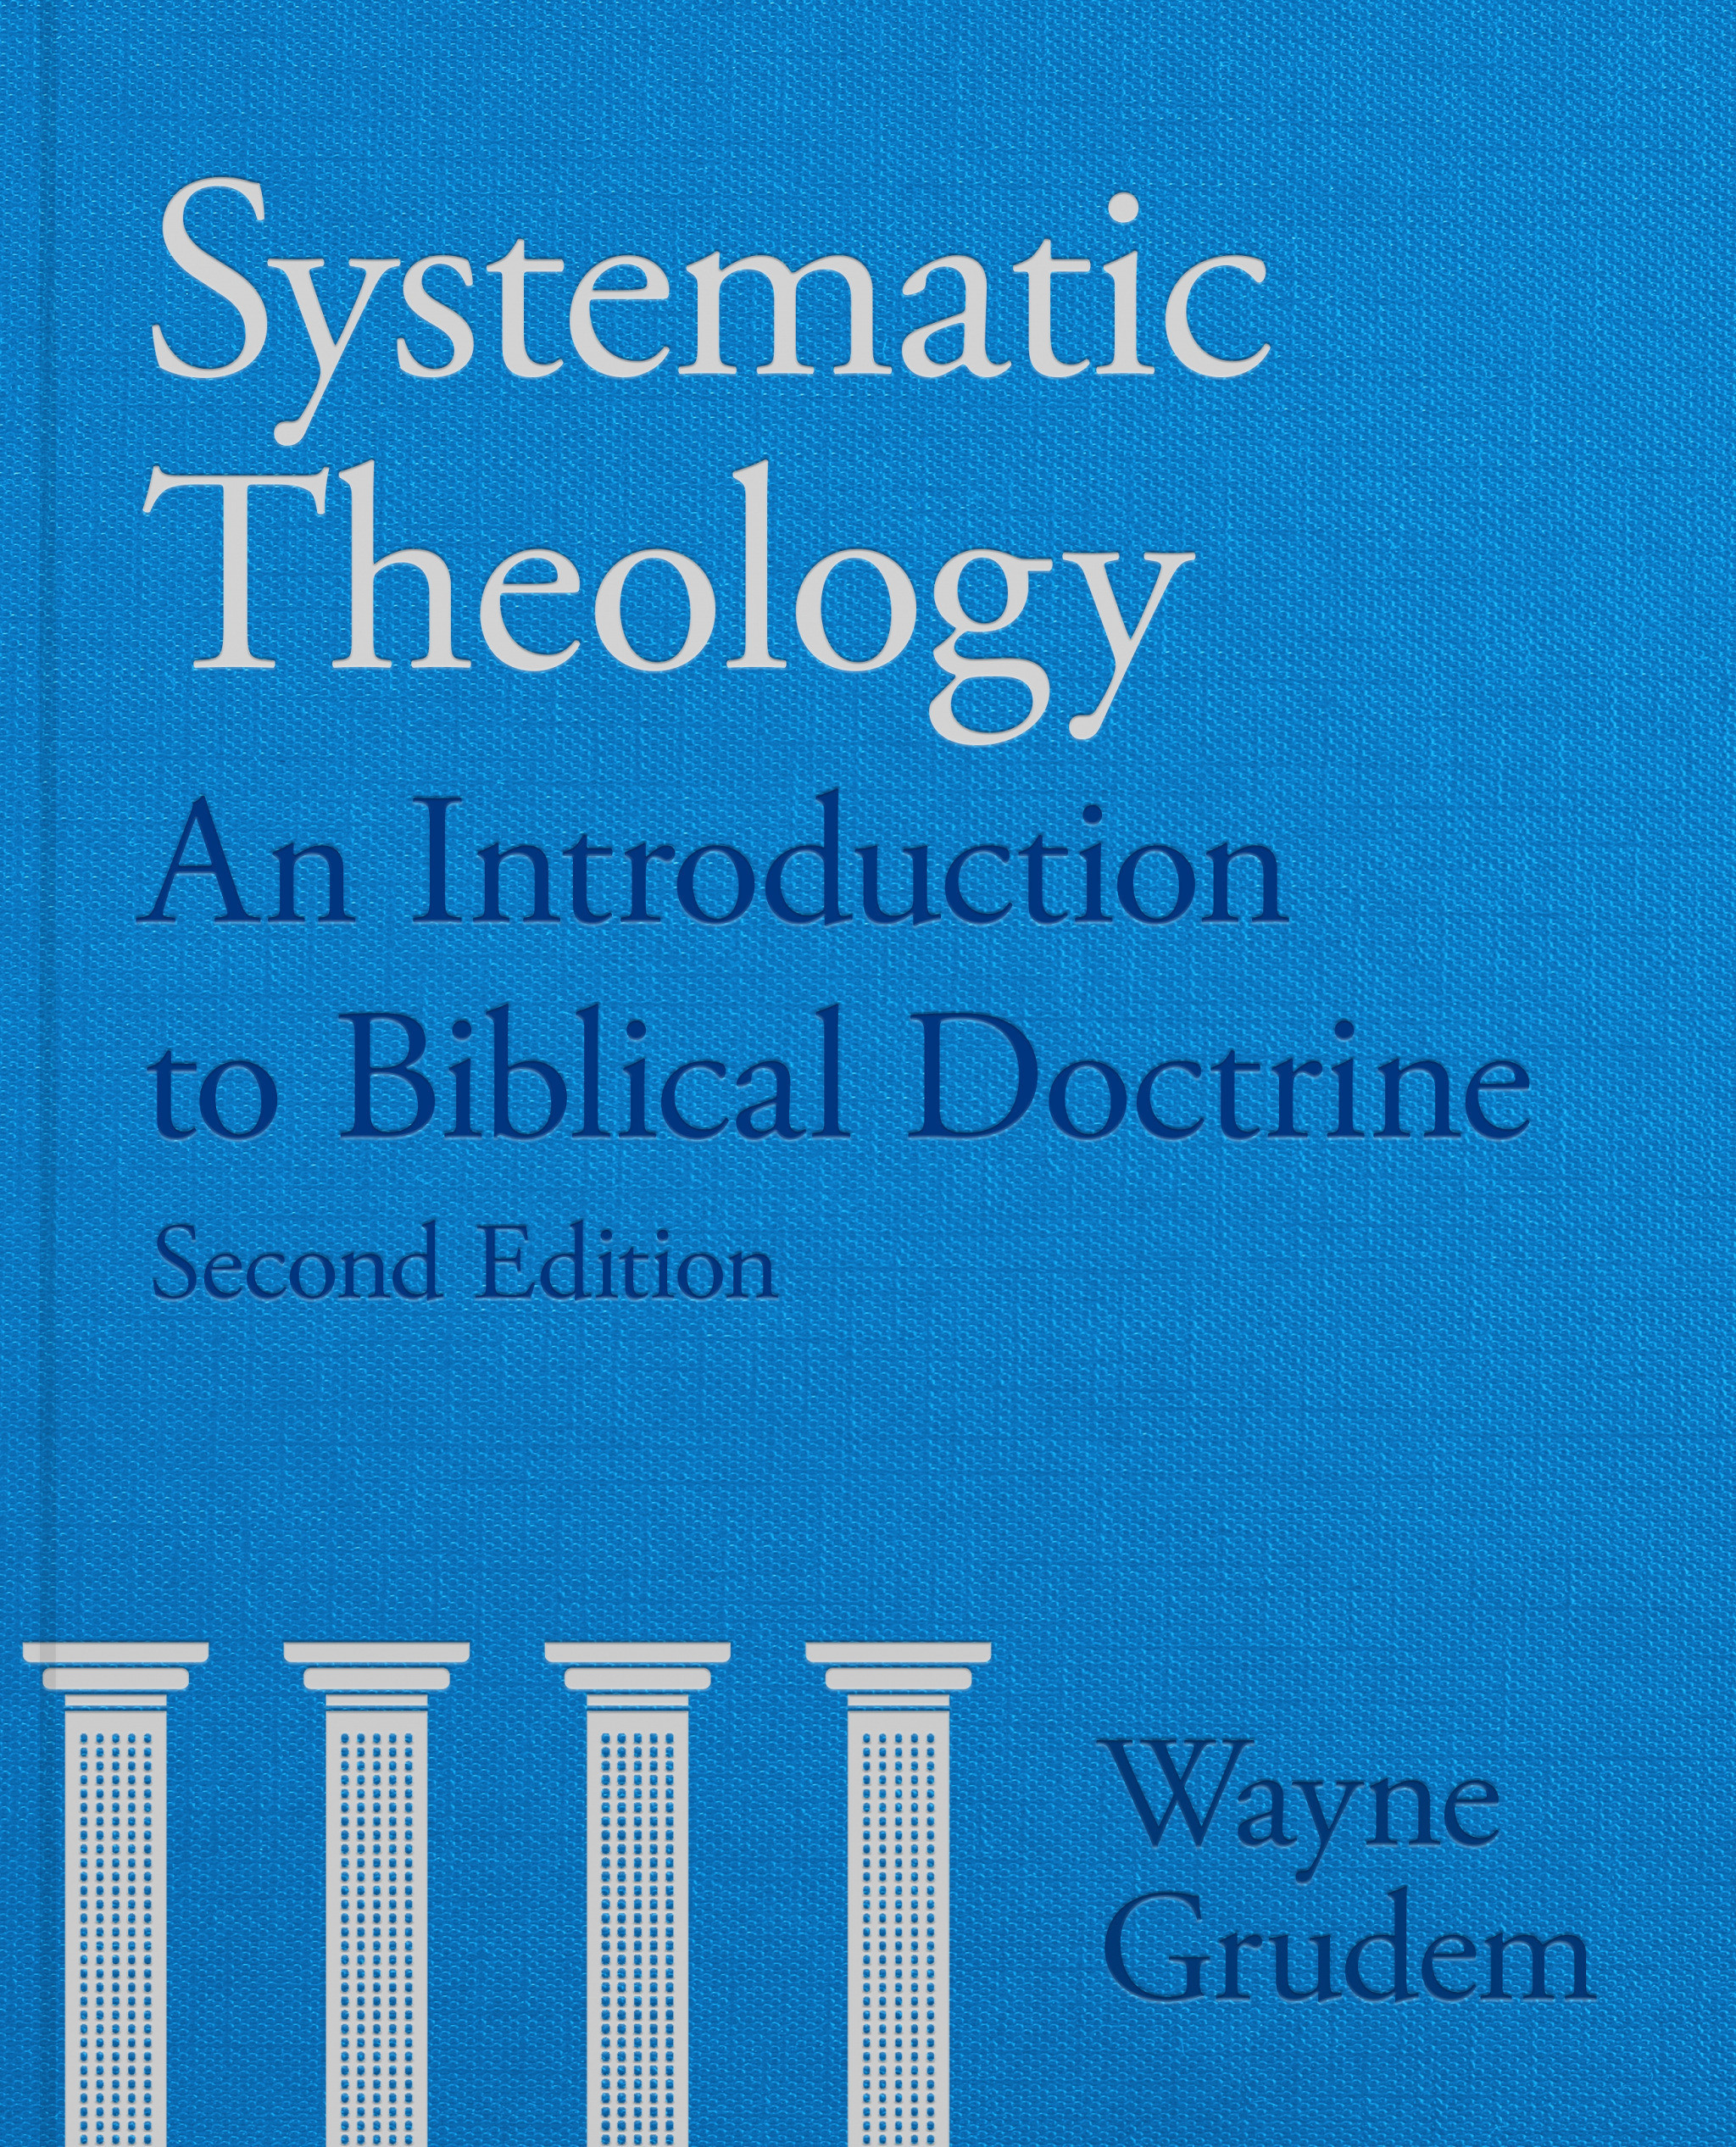 systematic theology 2nd edition by wayne grudem pdf download